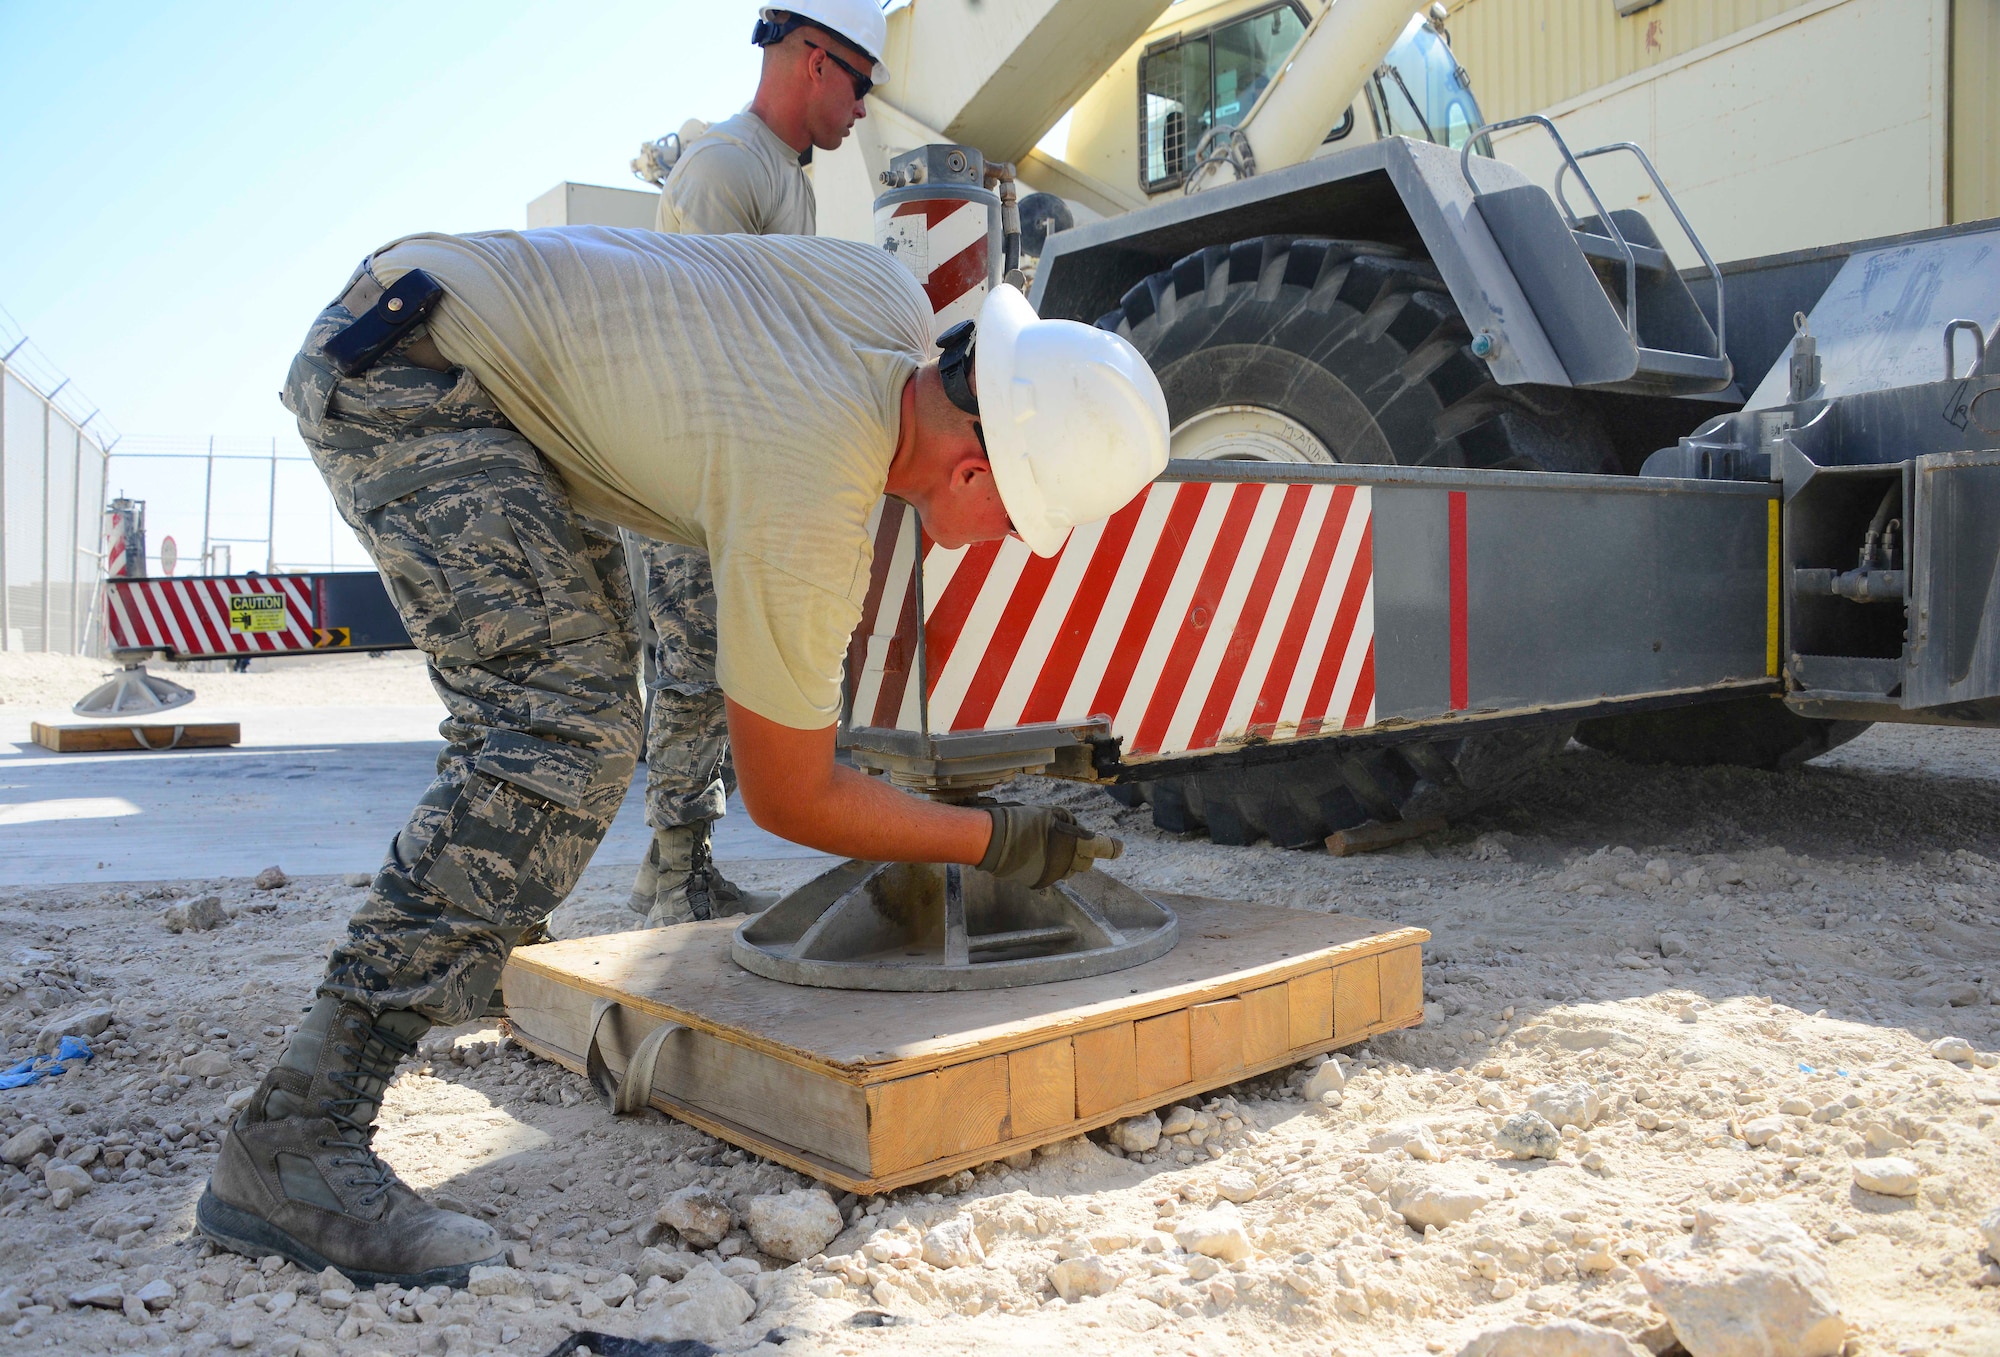 Senior Airman Ryan Batt, 379th Expeditionary Civil Engineer Squadron pavements and equipment apprentice, ensures the Terex RT 780 crane stabilizer is secured correctly Oct. 8, 2016, at Al Udeid Air Base, Qatar. Airmen from the 379th ECES and 379th Expeditionary Communications Squadron took down several inactive microwave dish transmitters from a radio tower. The transmitters previously provided internet and phone communication to the both the base and Camp As Sayliyah, but base infrastructure improvements over the years have rendered the dishes unnecessary. (U.S. Air Force photo/Senior Airman Janelle Patiño/Released)